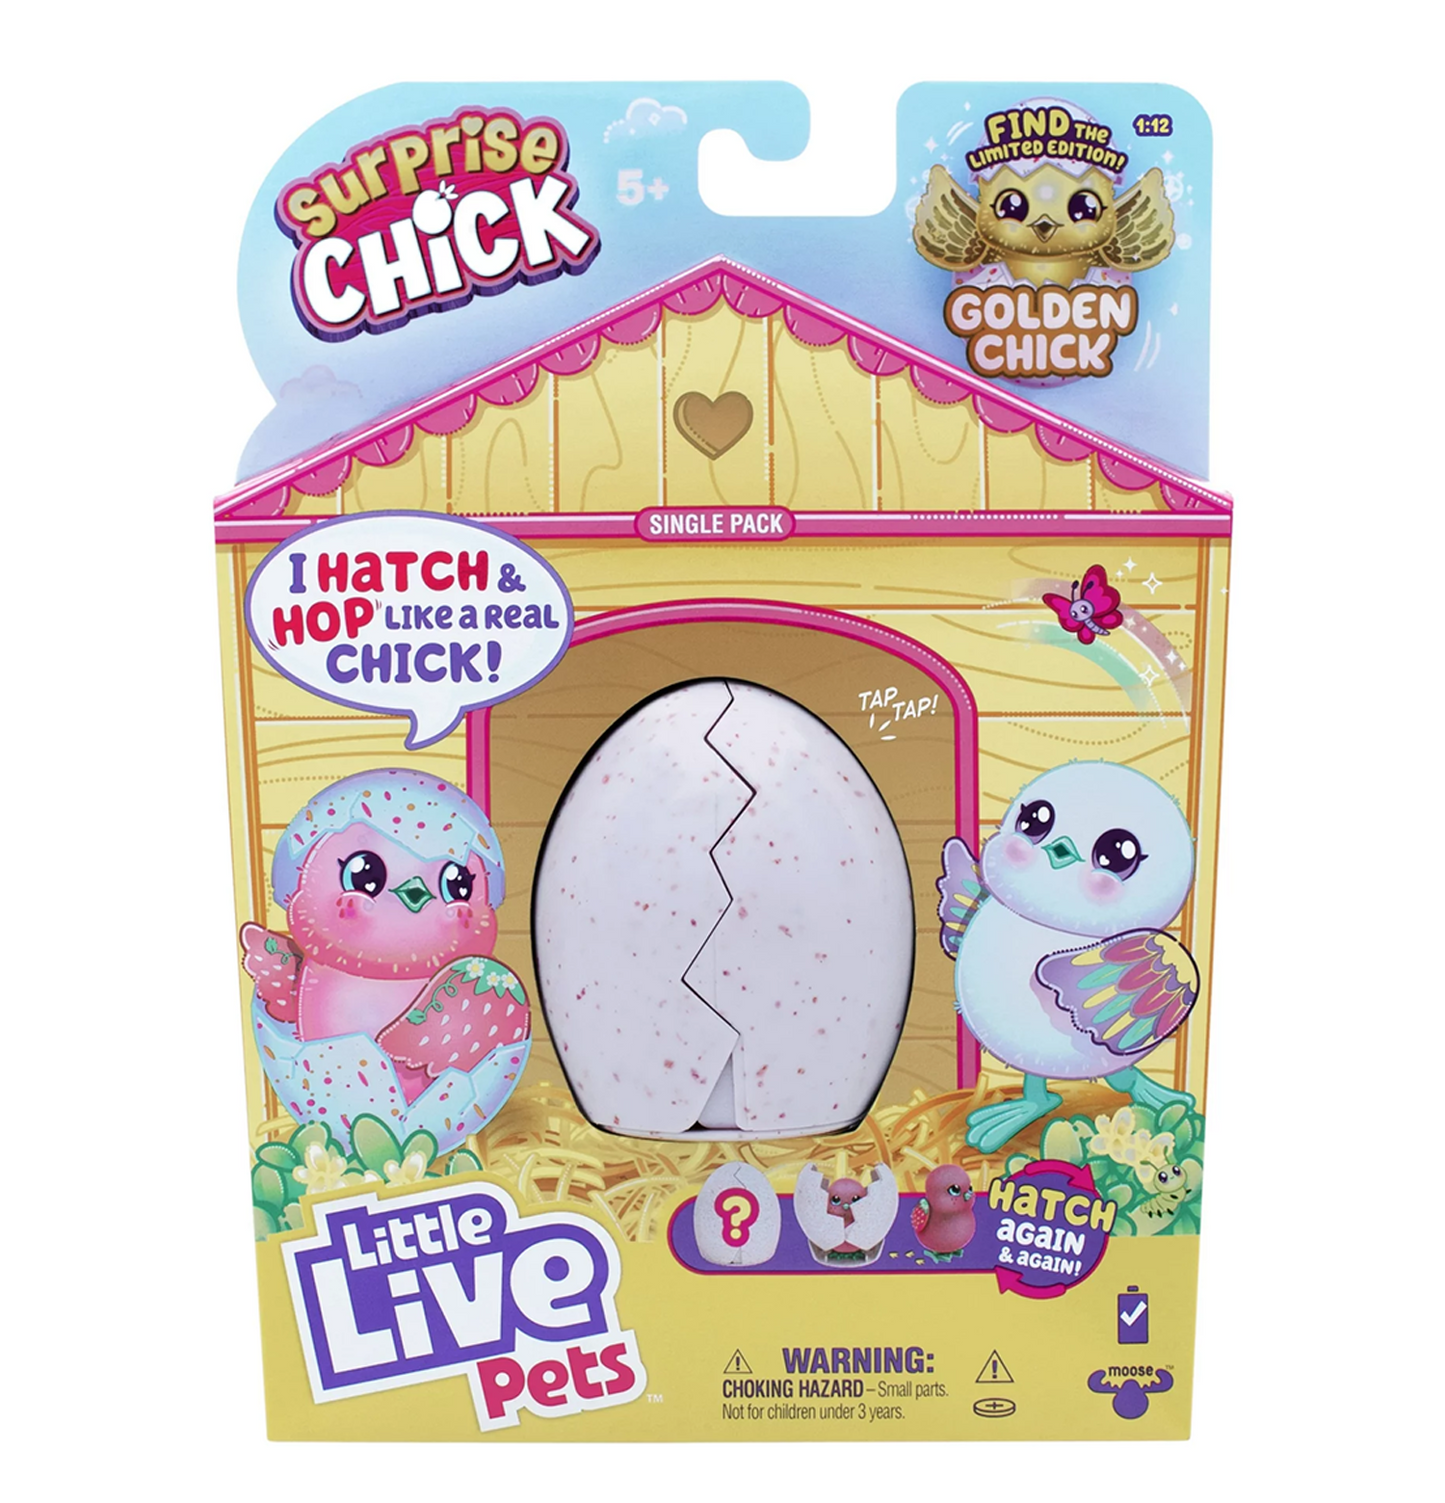 Little Live Pets Chick - Pink